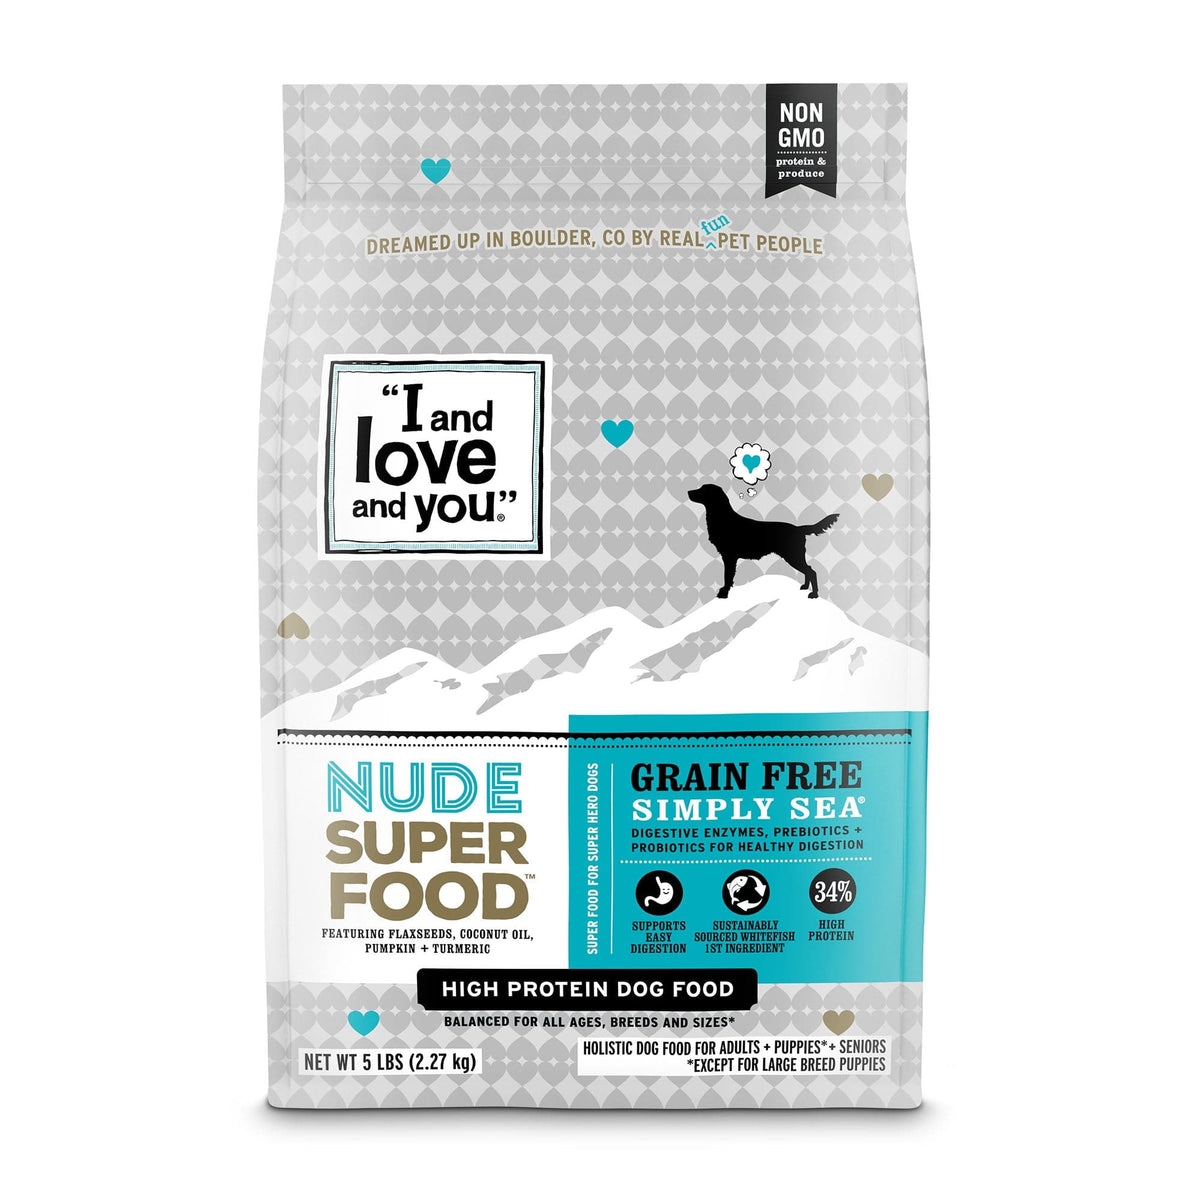 A bag of dog food featuring a silhouette of a dog, a blue label, and various text signs.